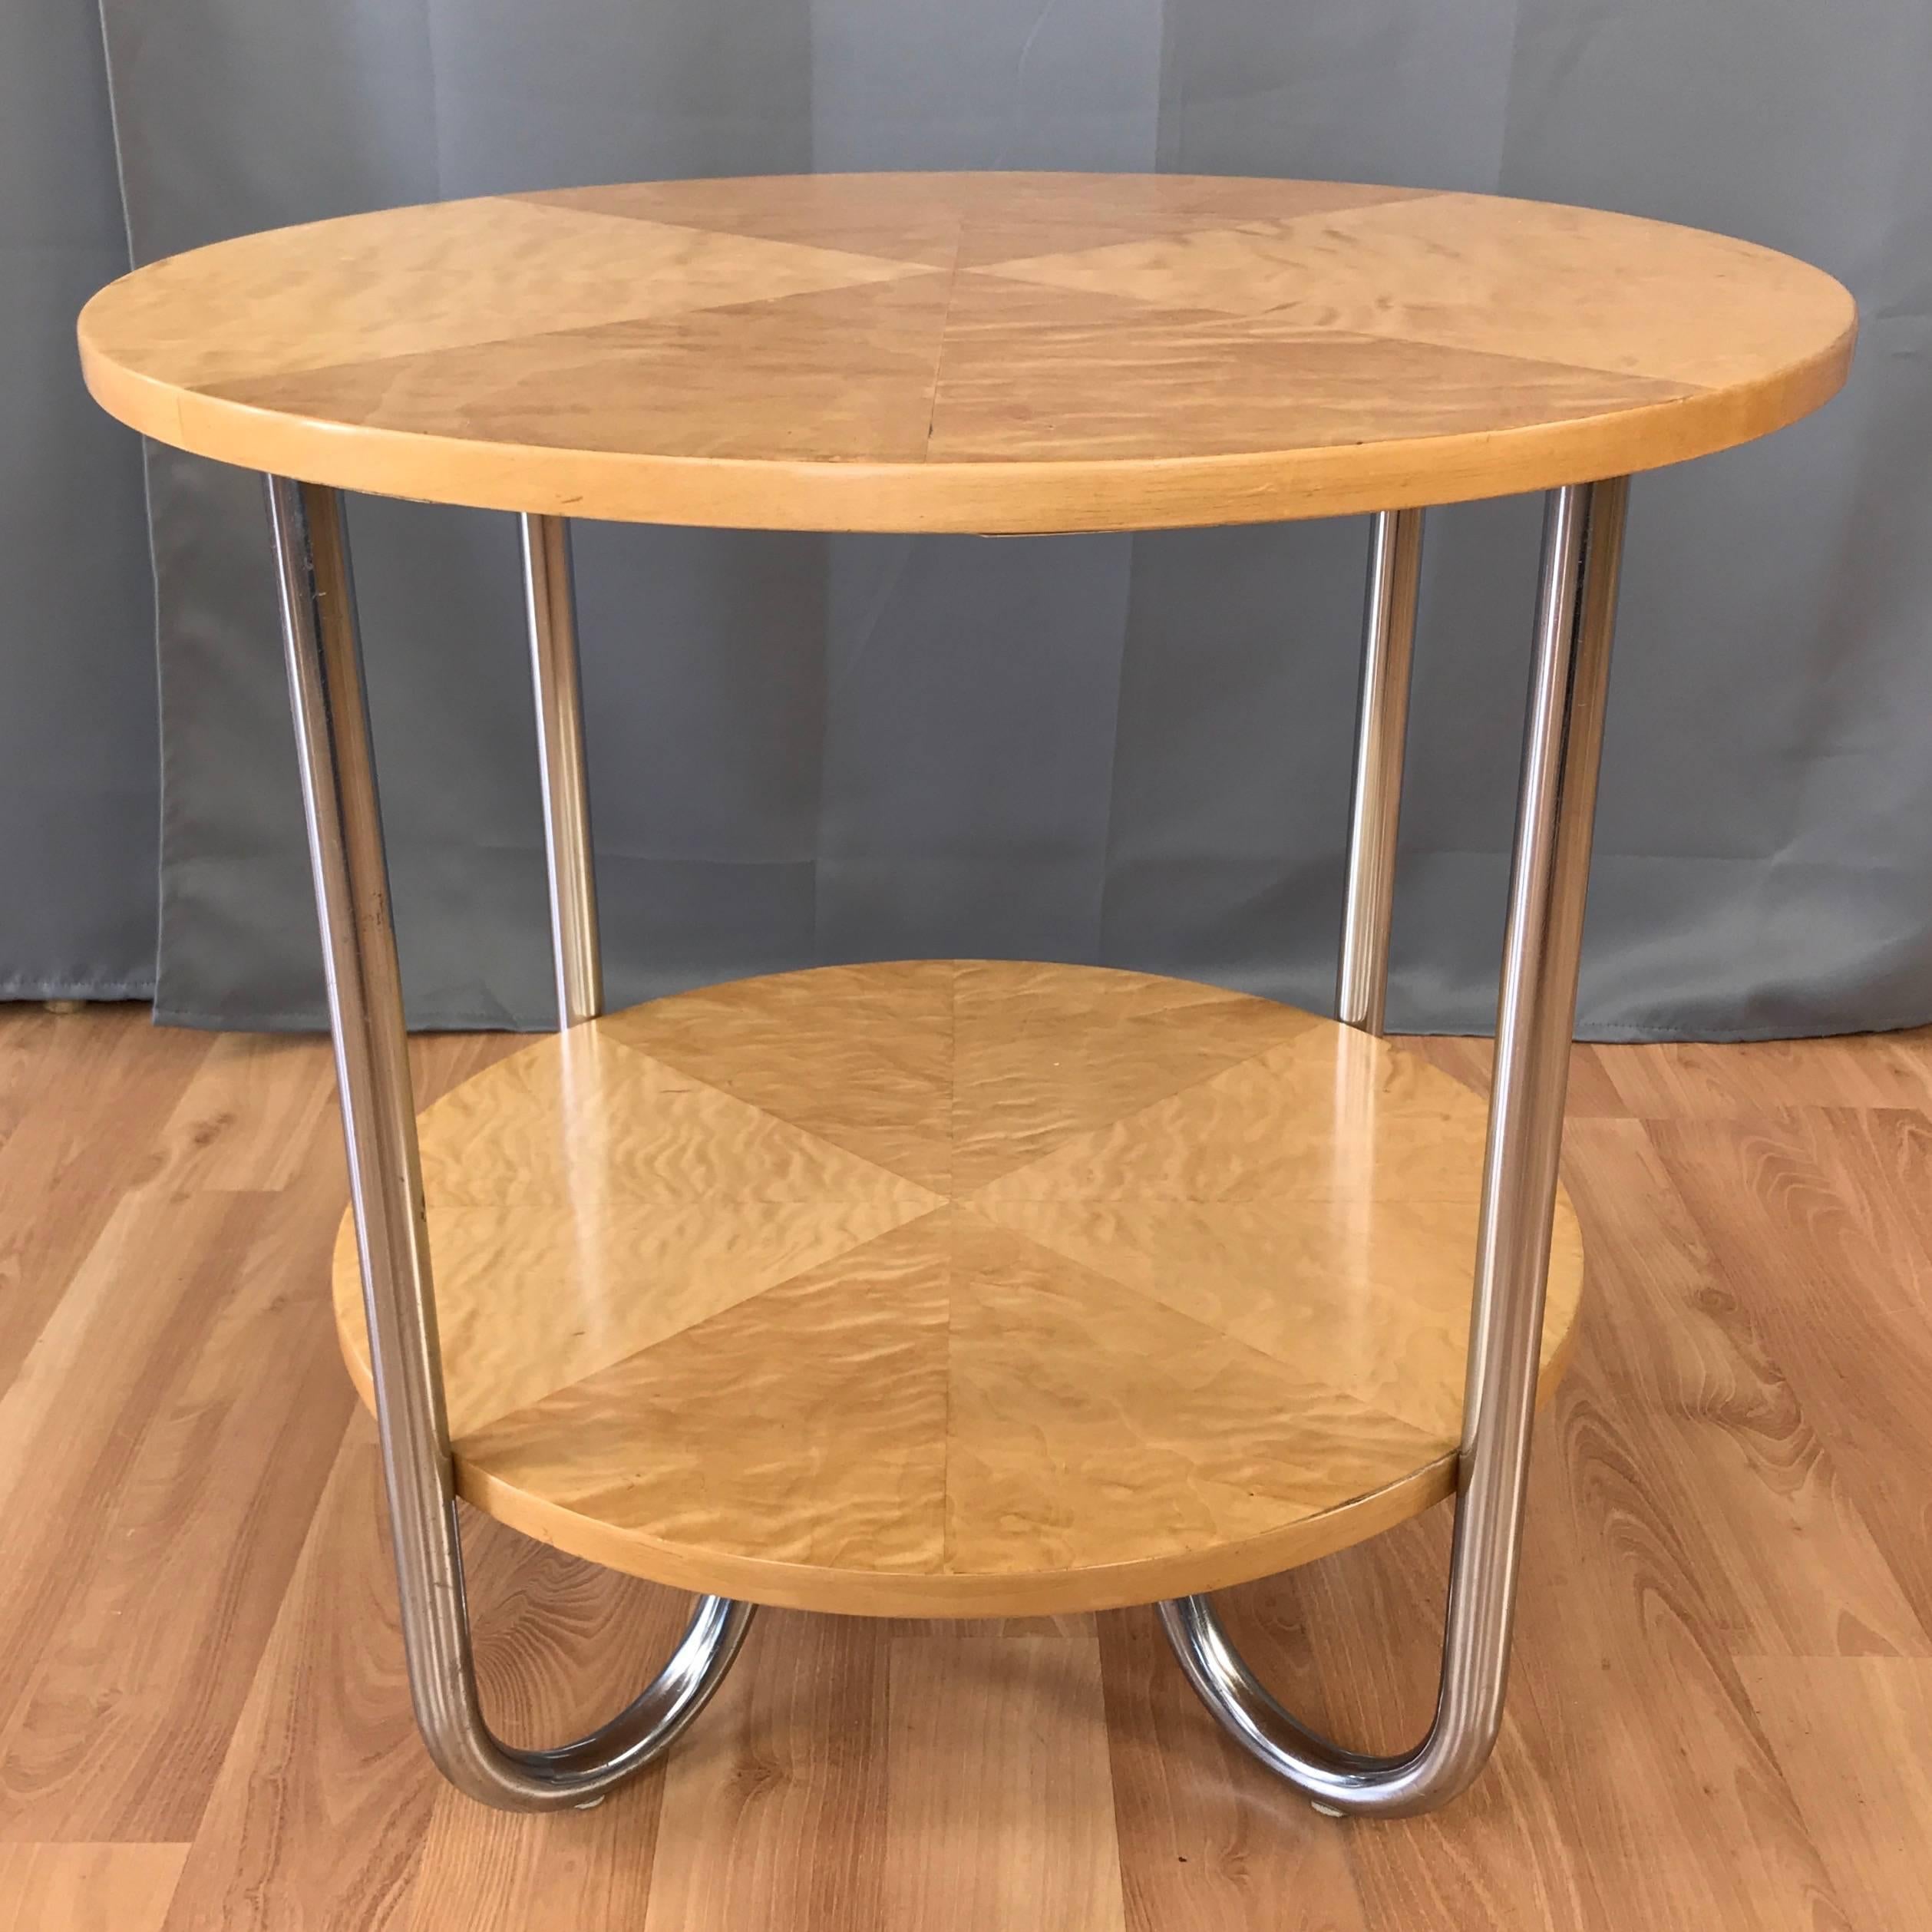 Streamlined Moderne Two-Tier Maple Side Table Attributed to Wolfgang Hoffmann for Royal-Chrome